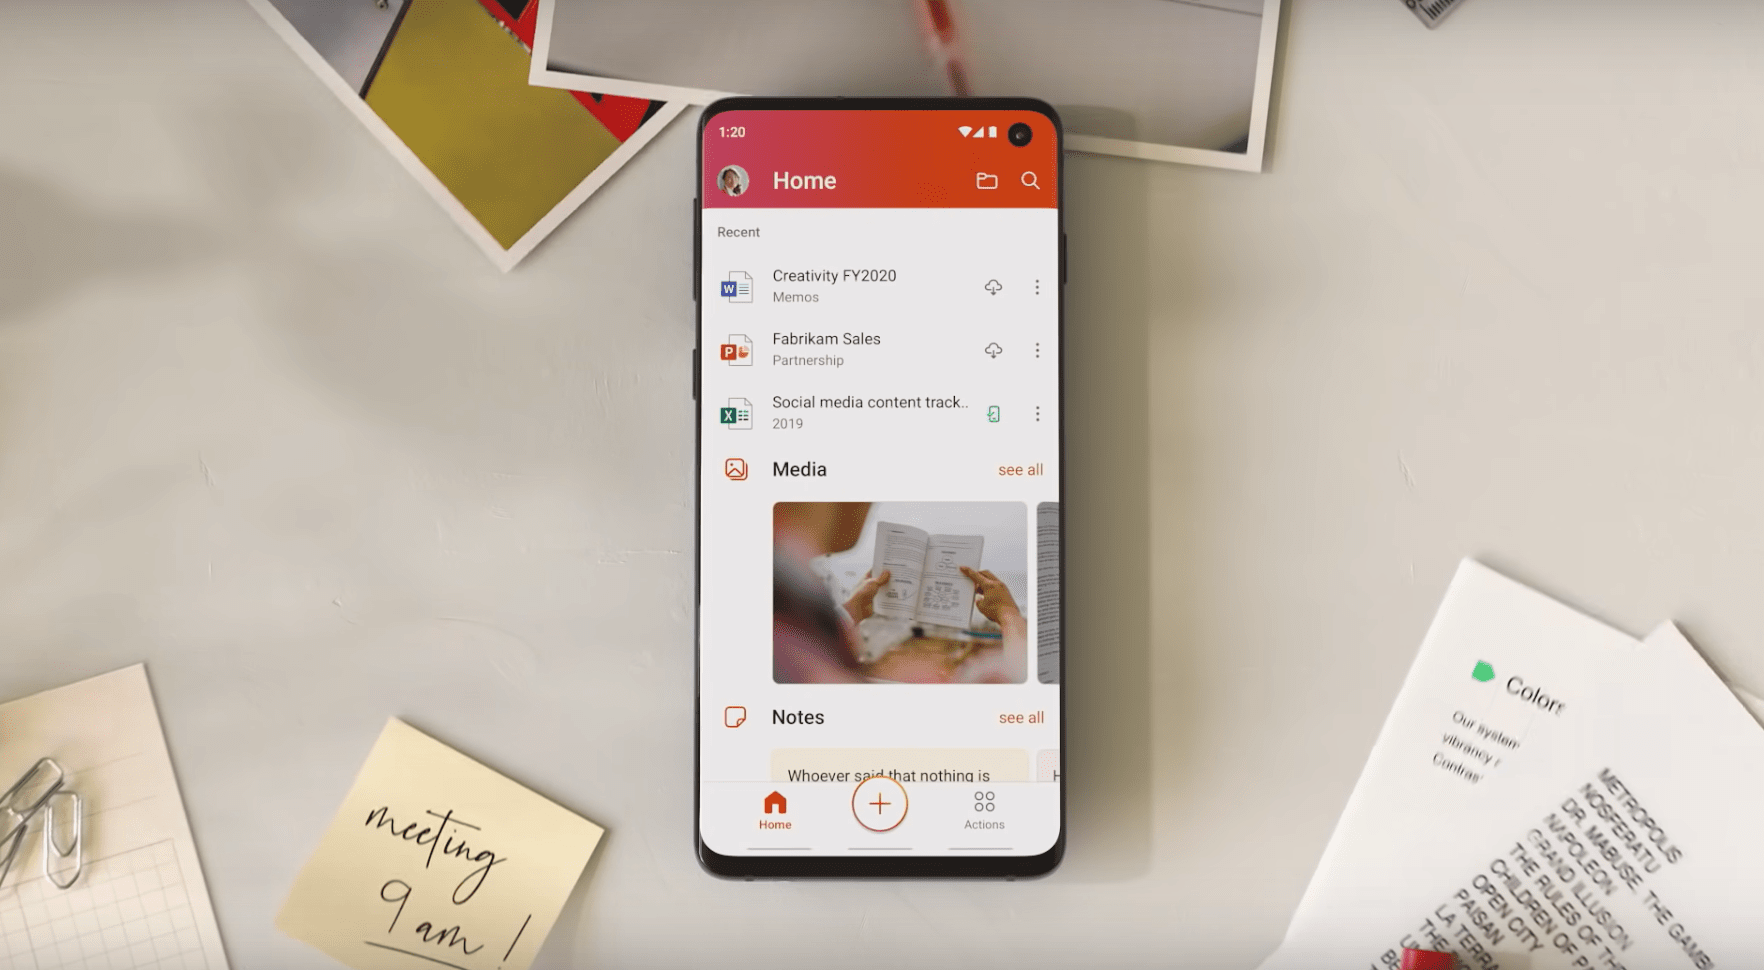 Microsoft launches Office for Android, bringing together Word, Excel and PowerPoint in just one app